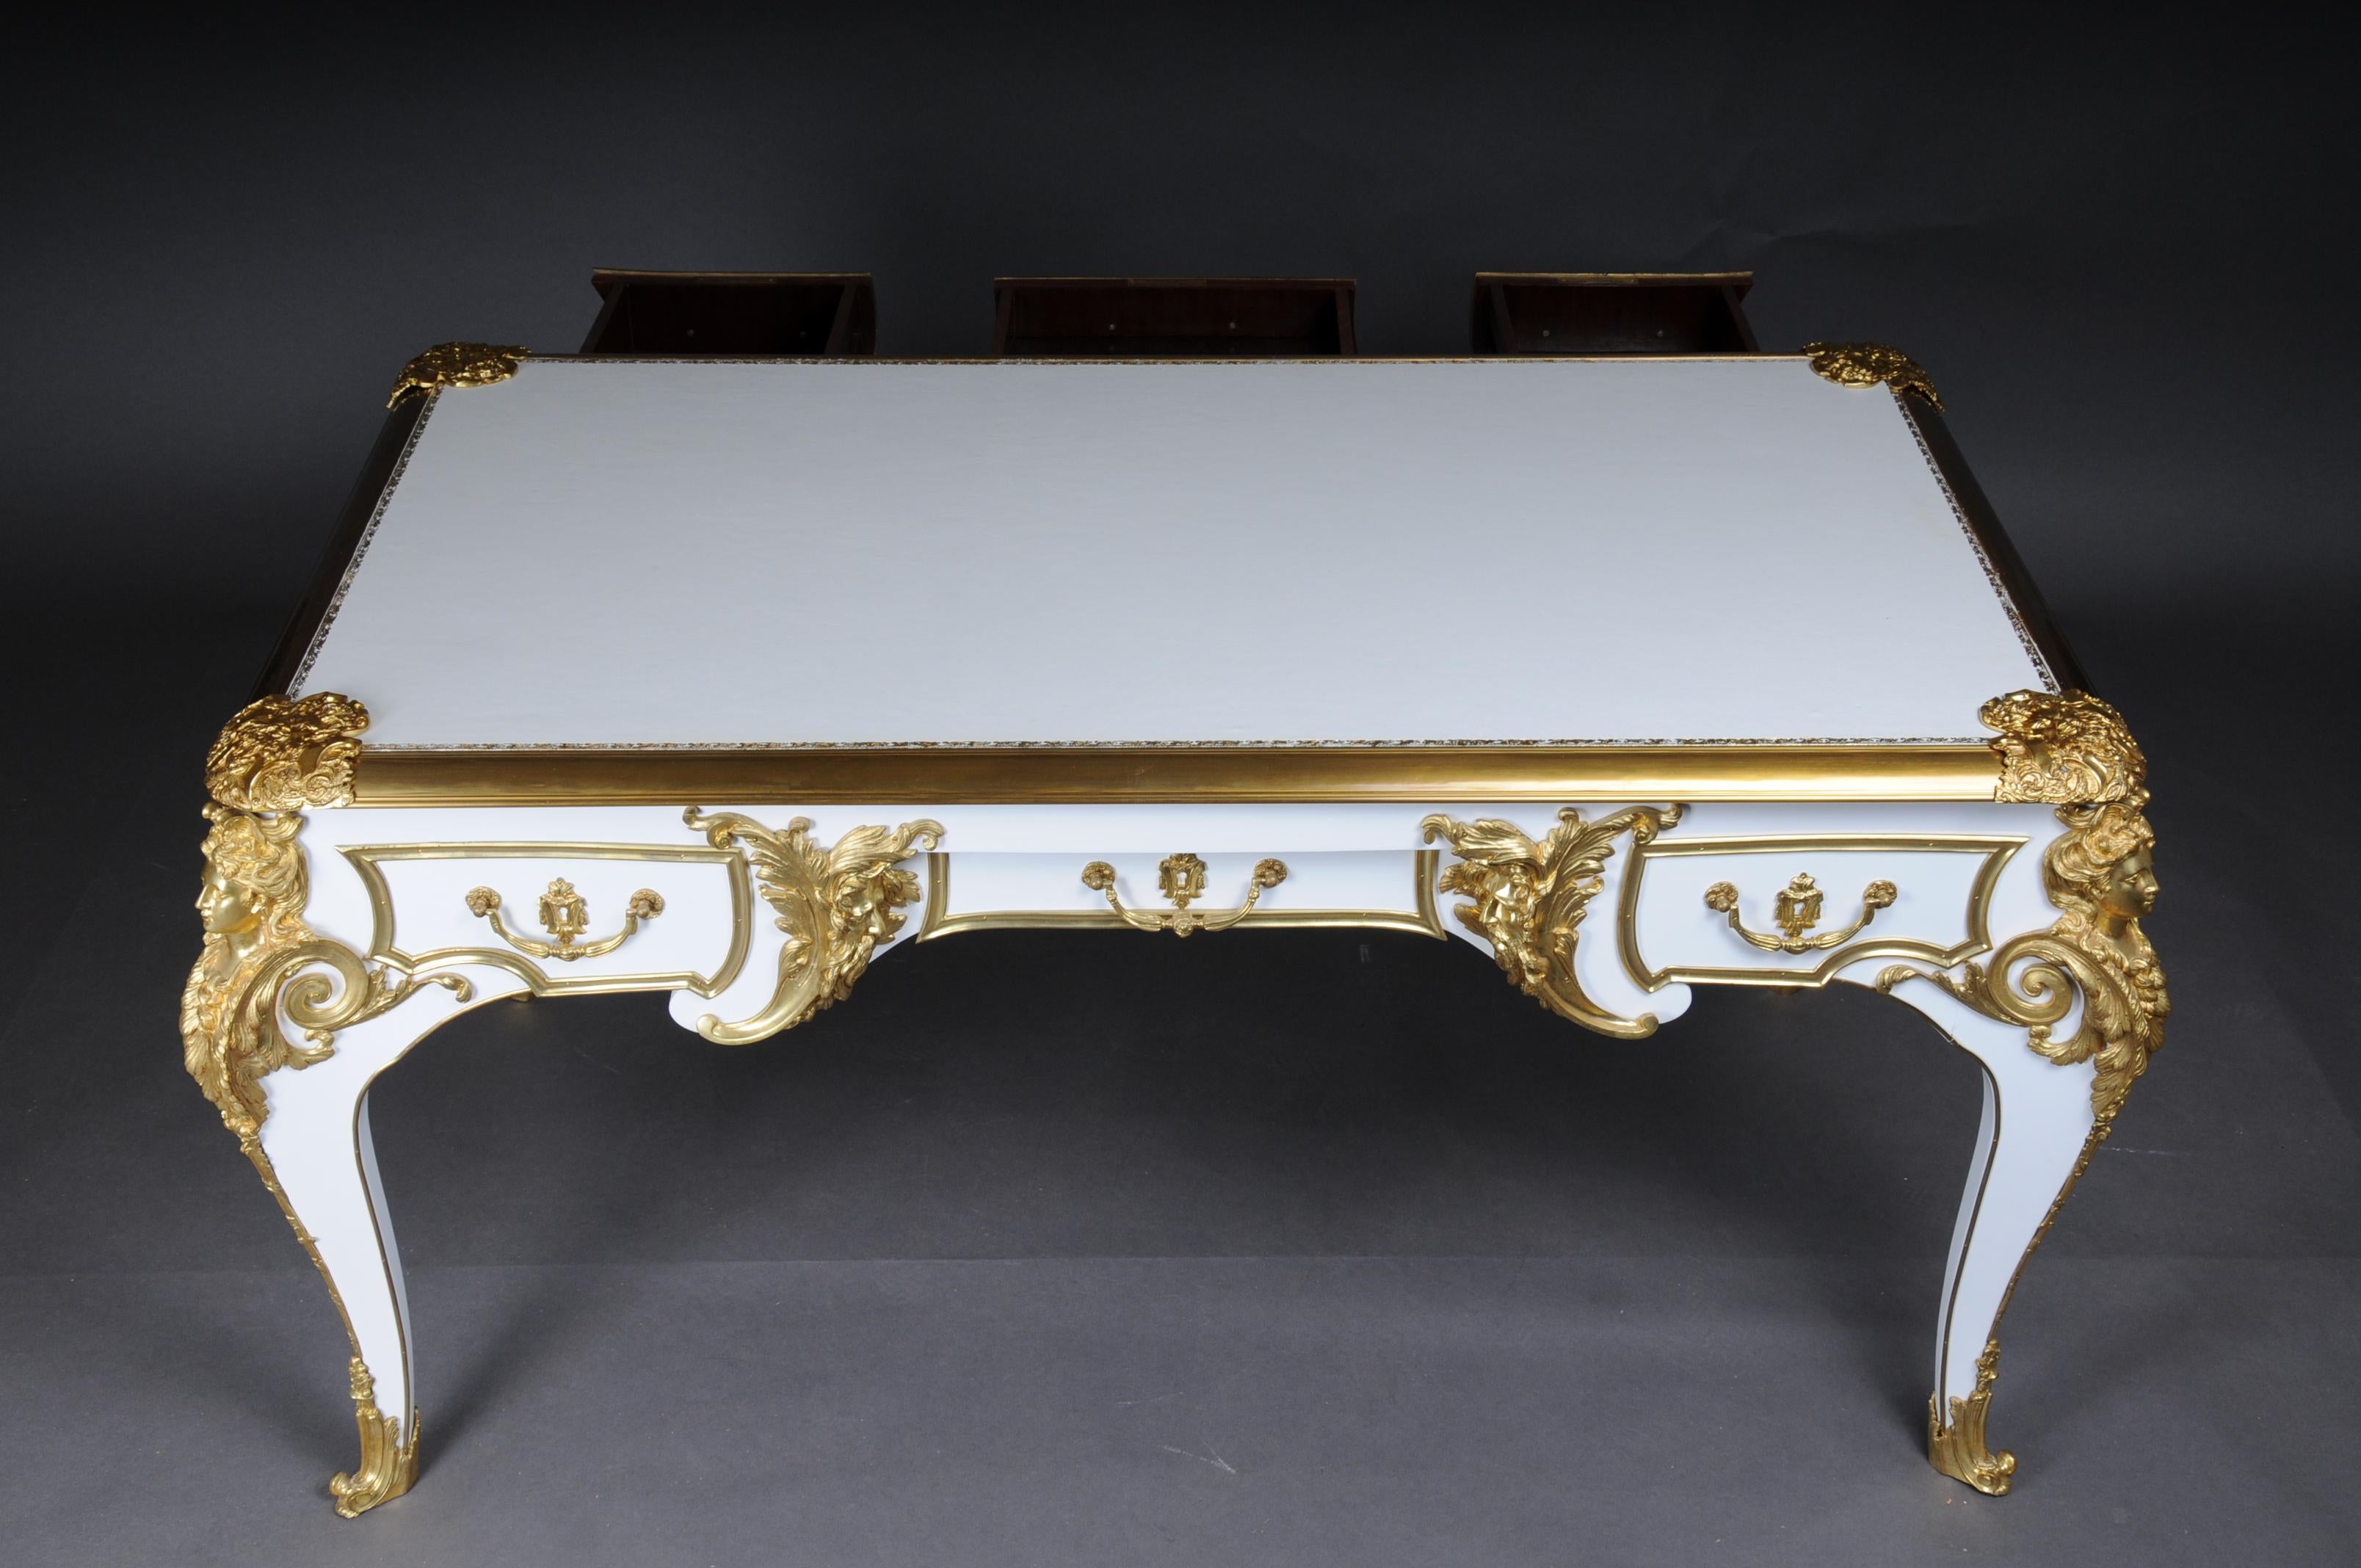 20th Century Bureau Plat/Desk high gloss white with gold after C. Boulle For Sale 9